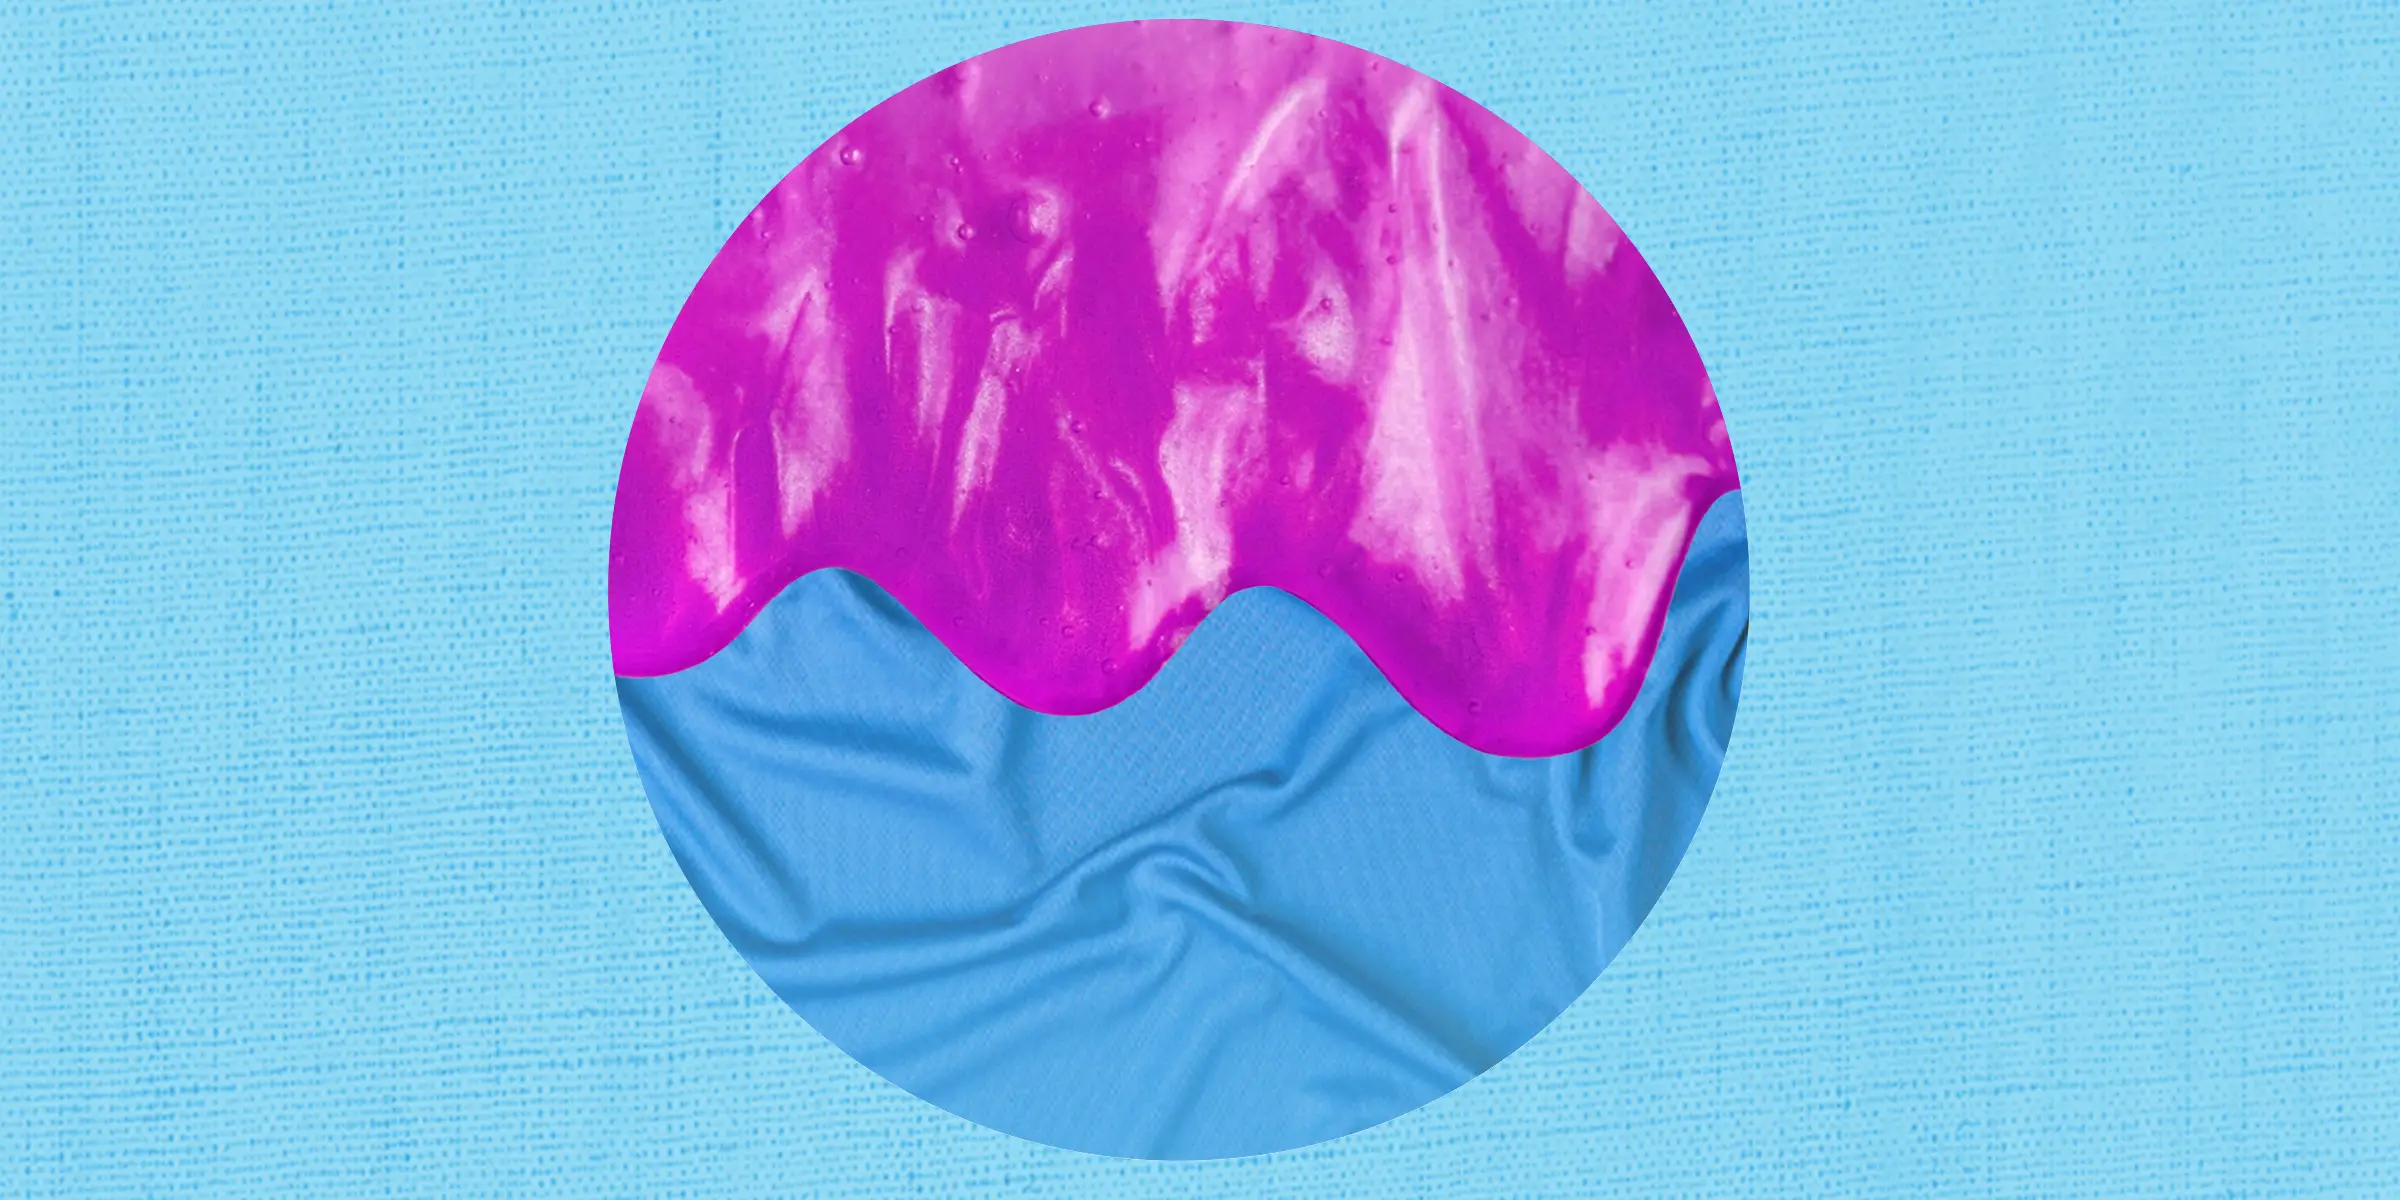 How to get silly putty out of clothes? 3 best ways discussed